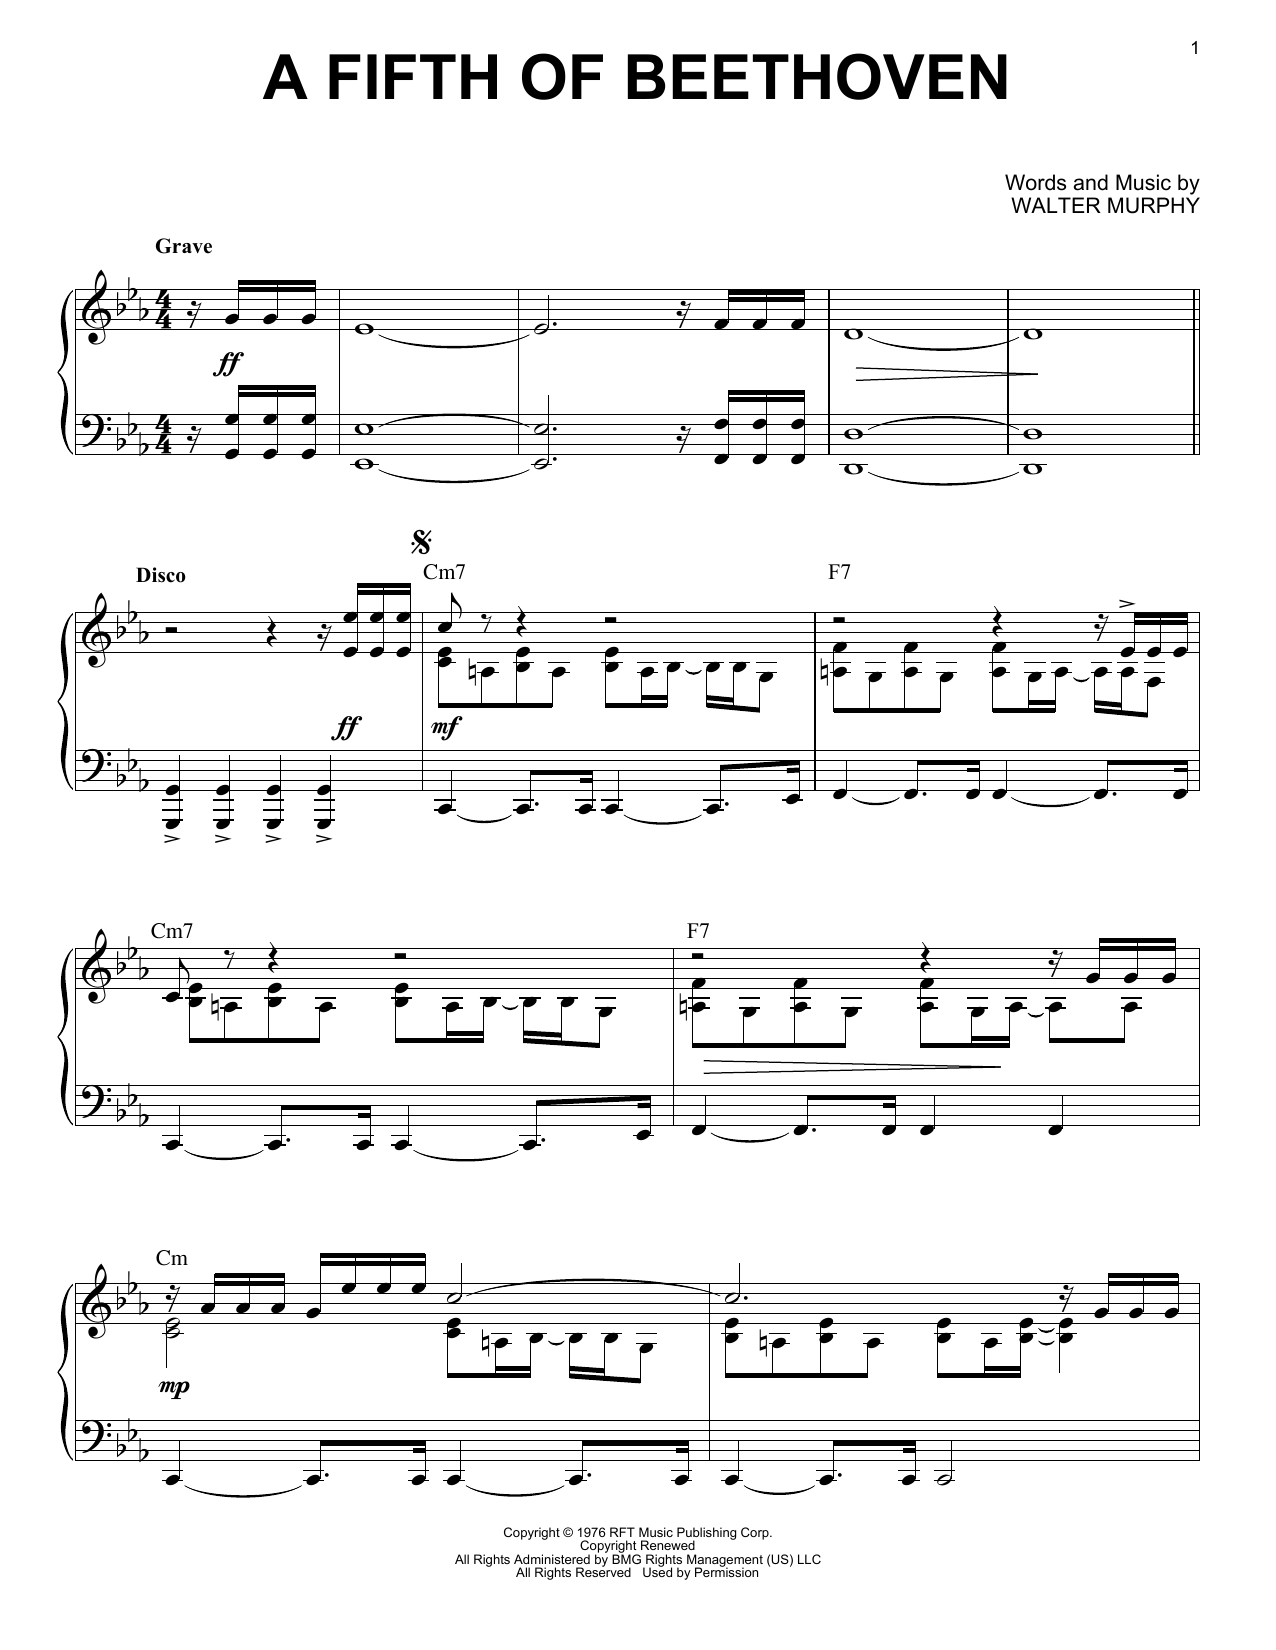 Download Walter Murphy A Fifth Of Beethoven Sheet Music